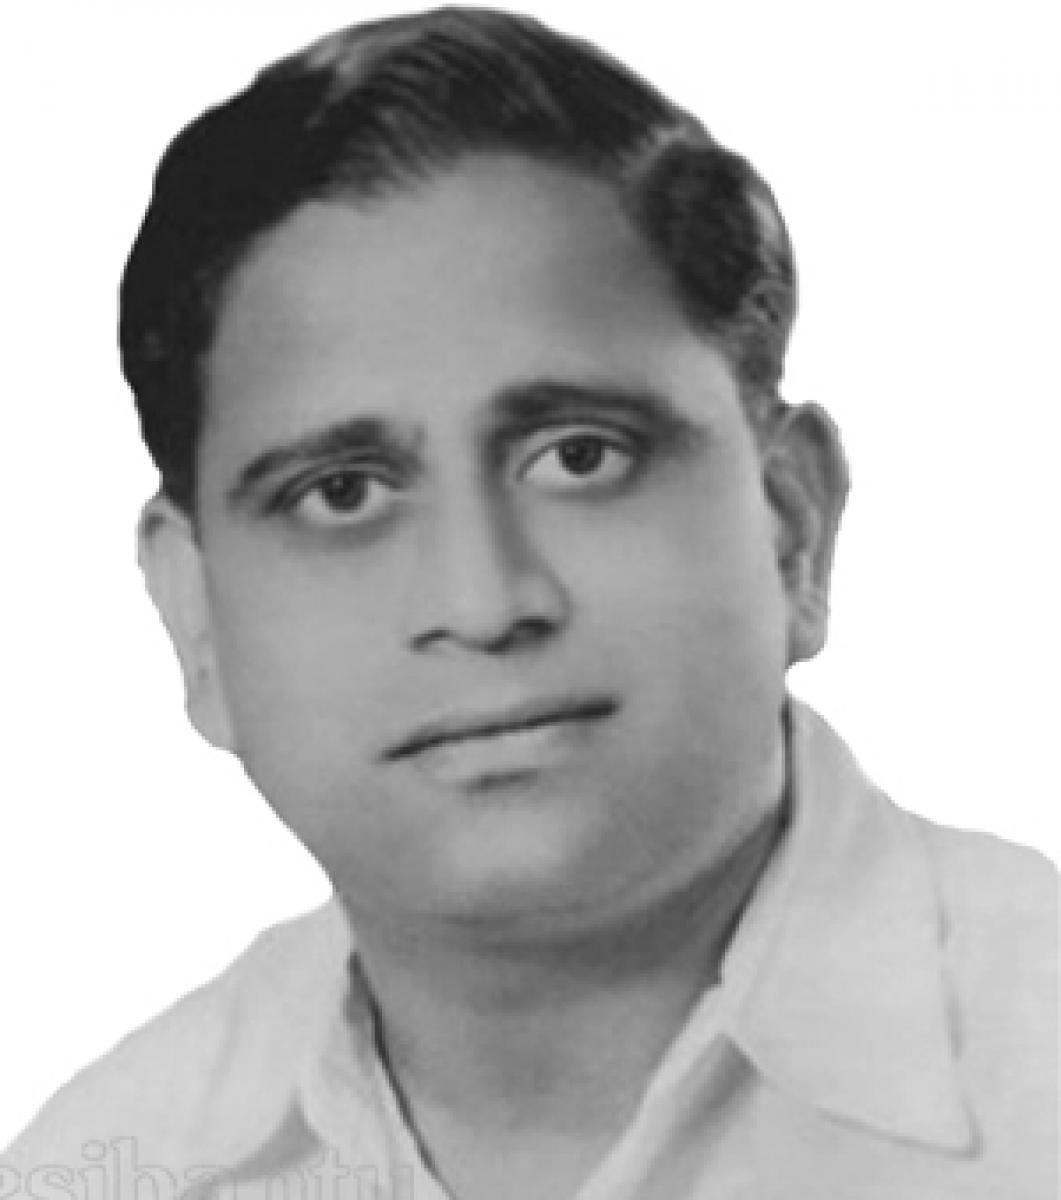 Ode to Ghantasala on his death anniversary